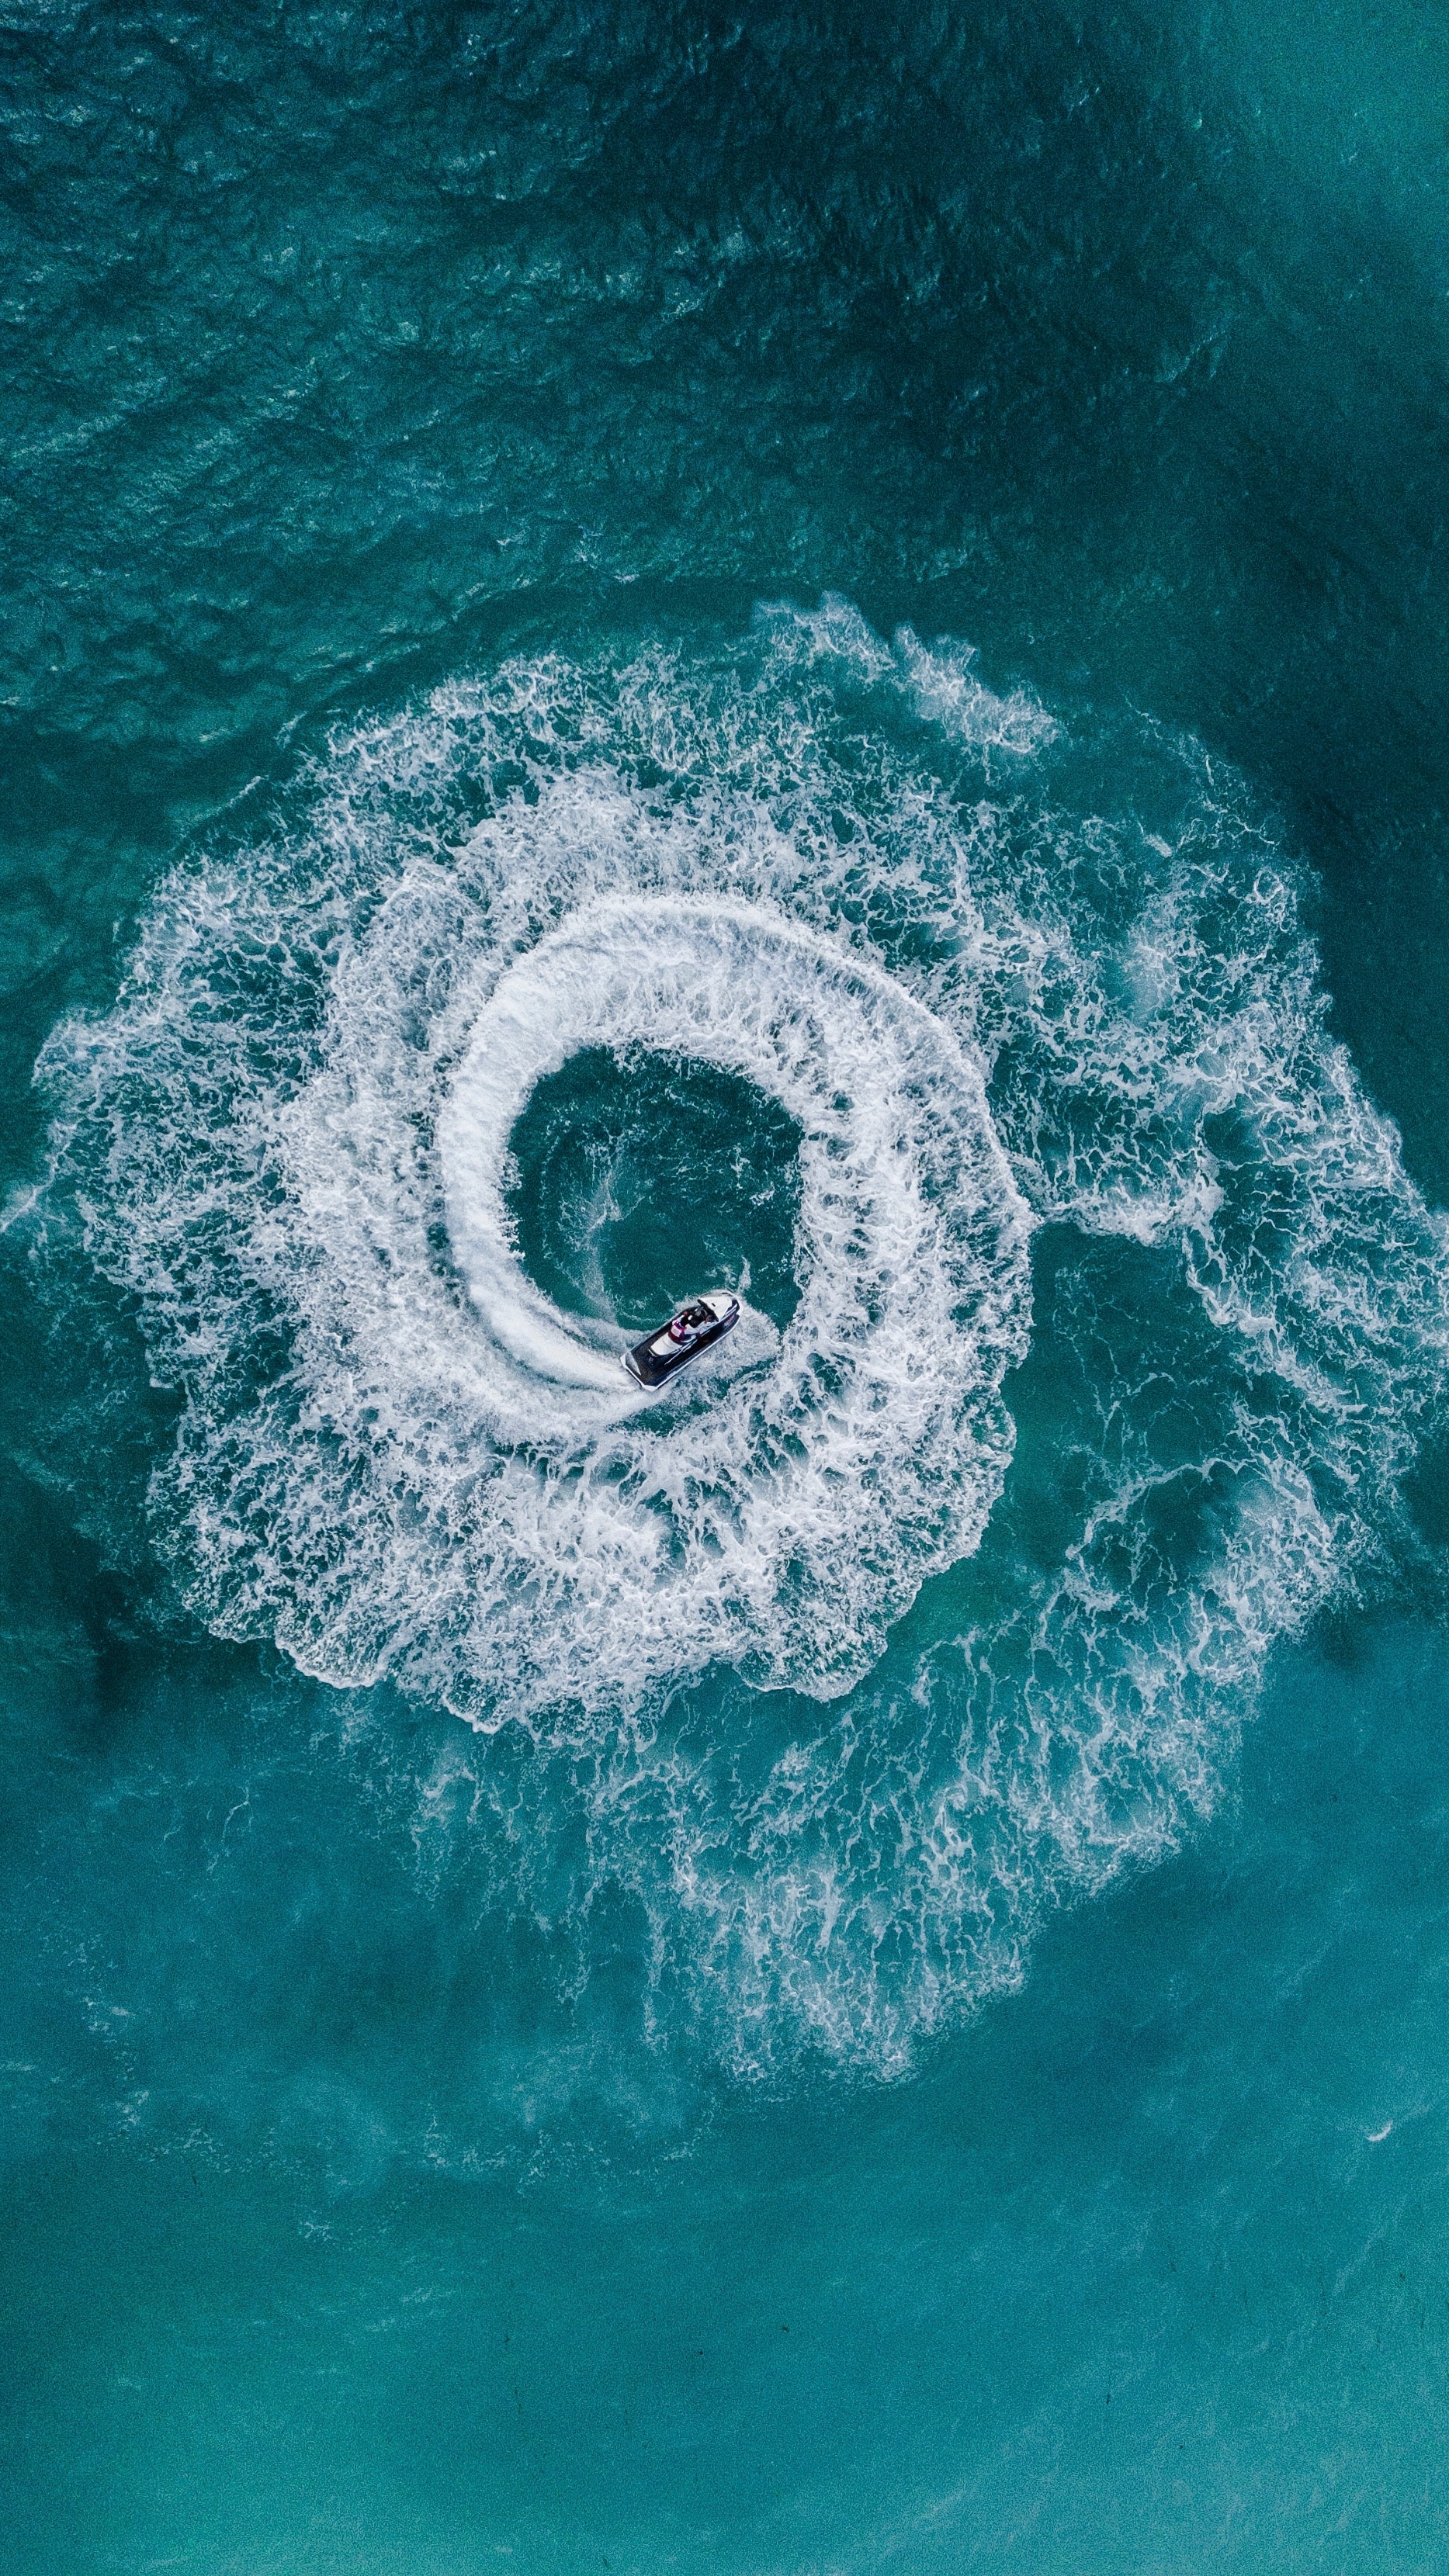 HD wallpaper miscellaneous, water, sea, waves, view from above, miscellanea, jet ski, hydrocycle